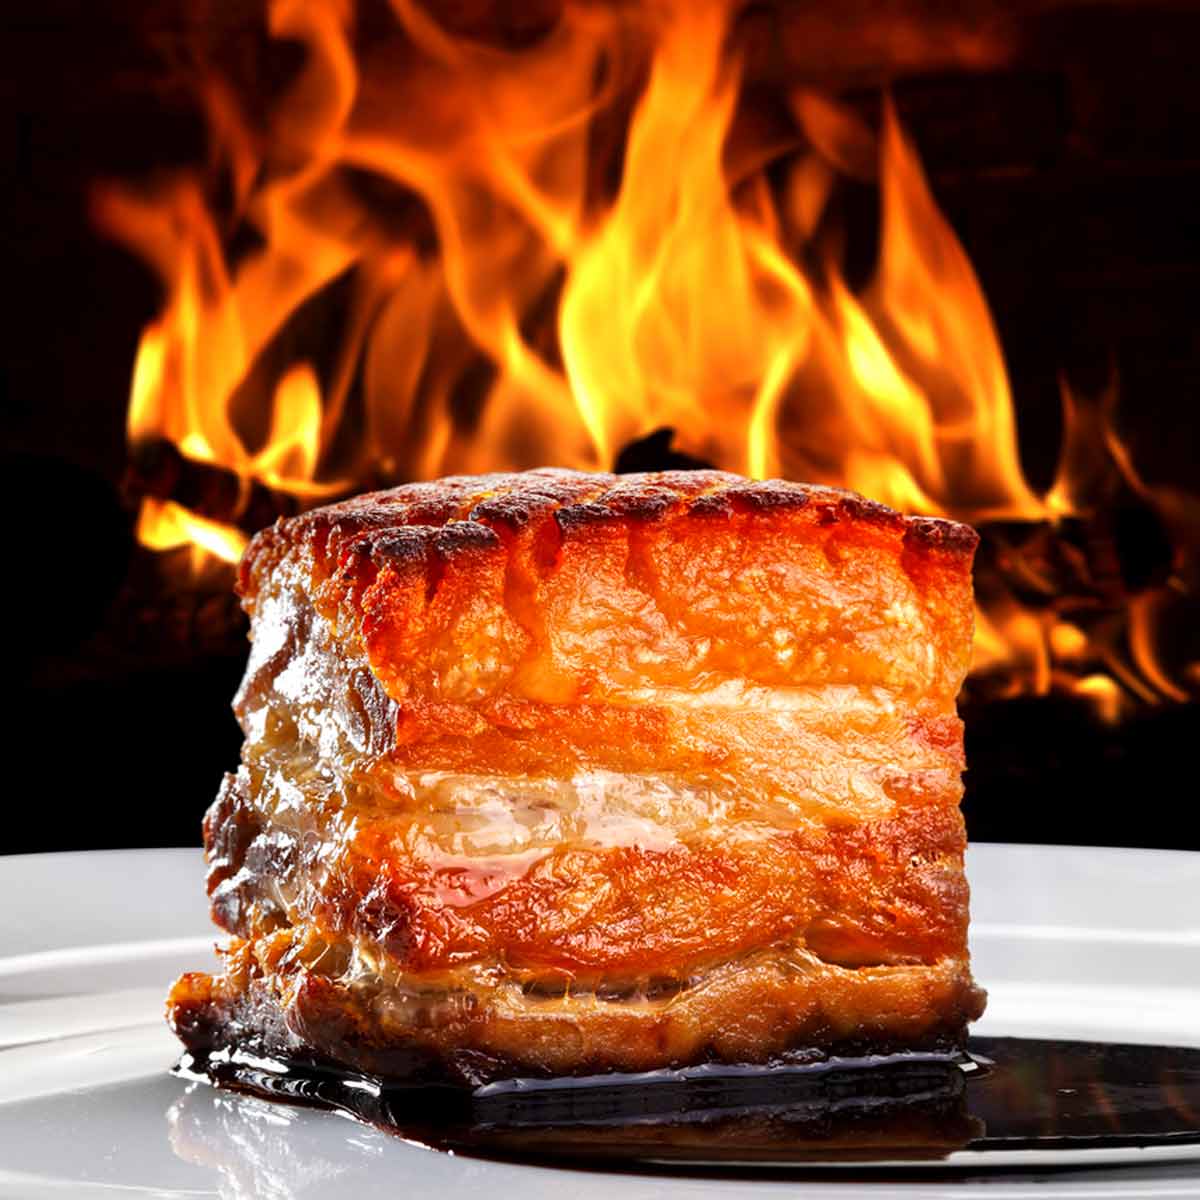 A portion of smoked pork belly in front of a fire.